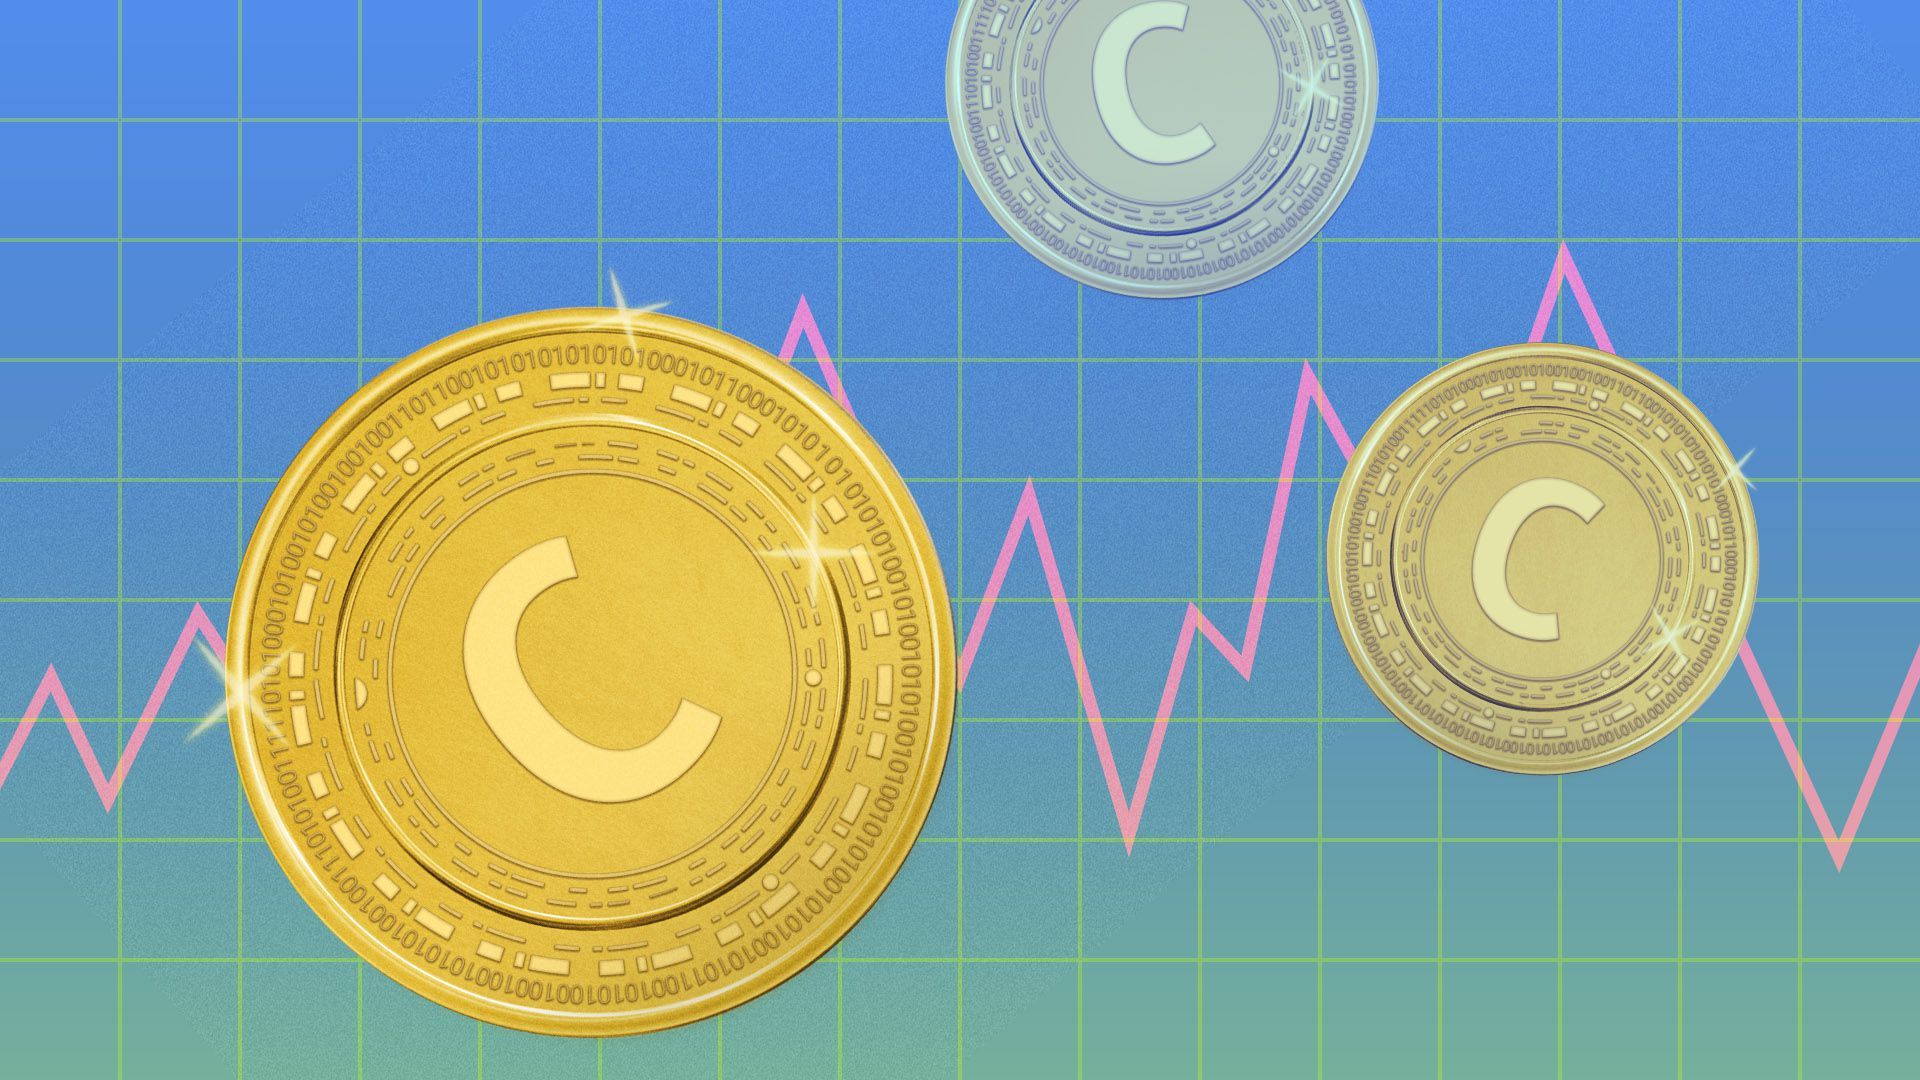 Illustration of gold coins with binary code and the letter "C" against a backdrop of a stock chart